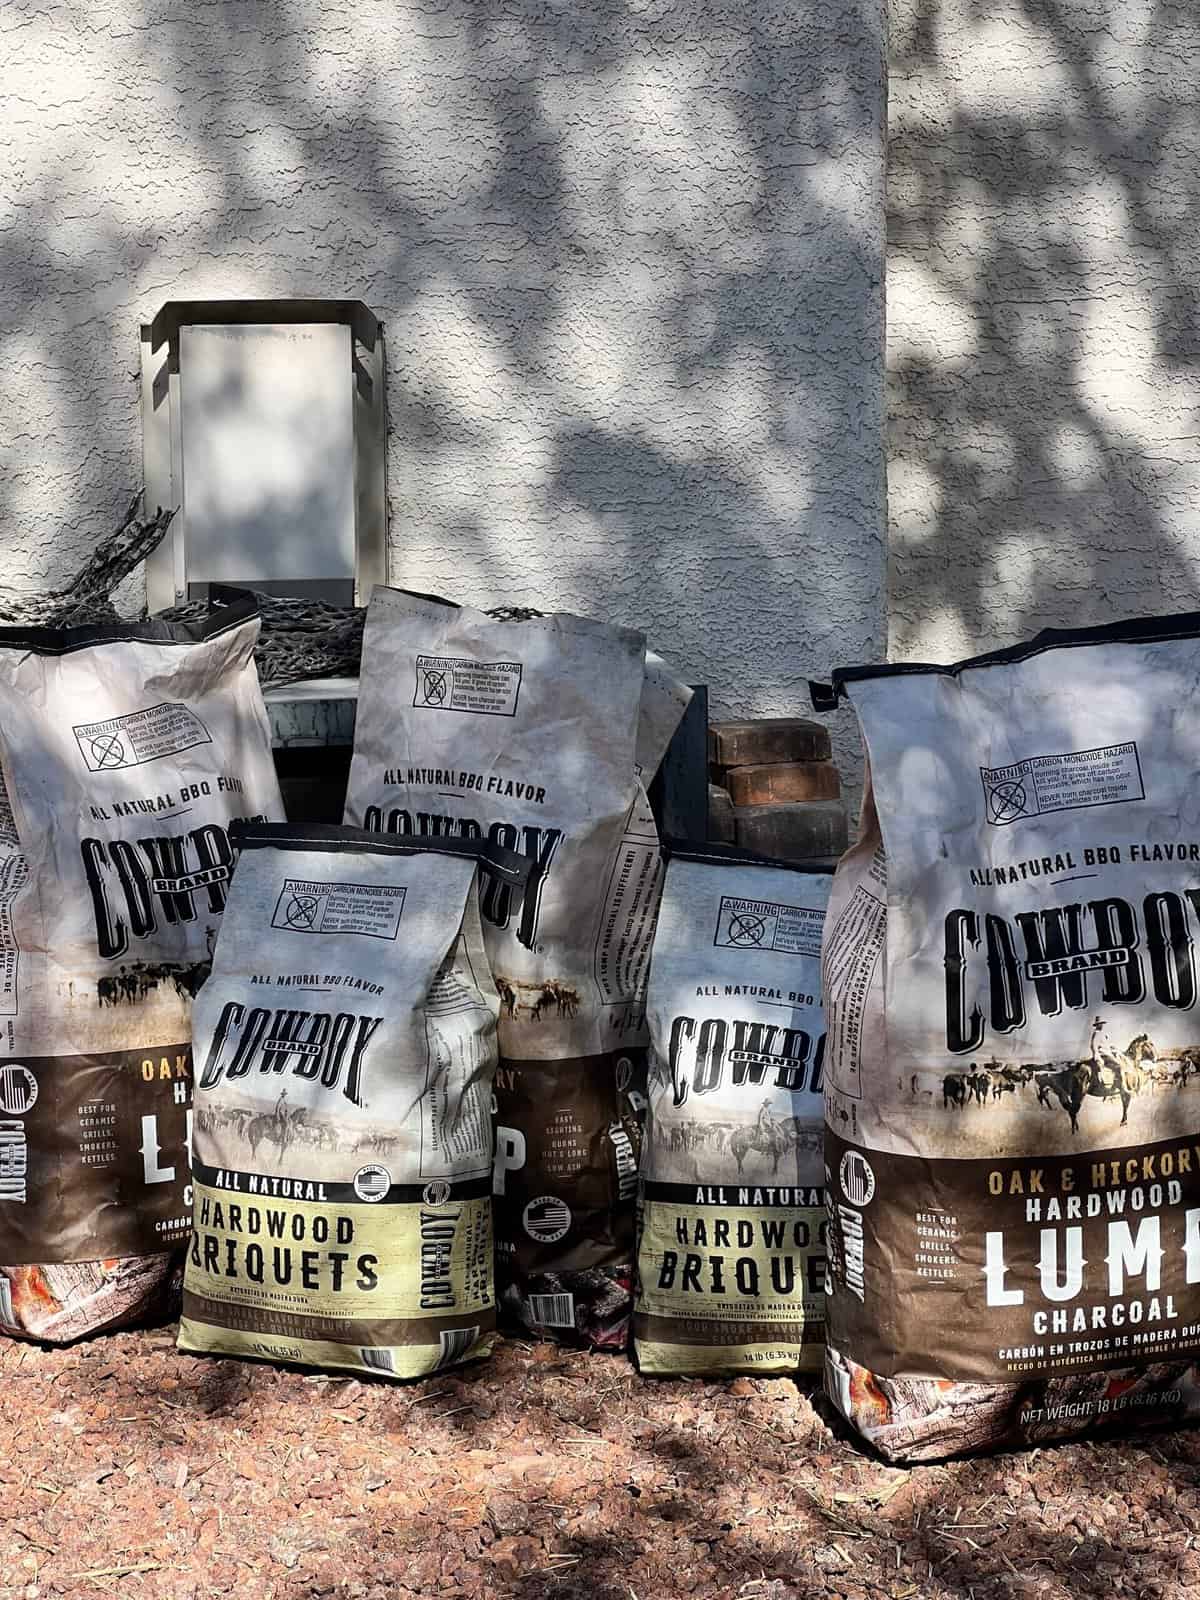 Bags of Cowboy charcoal.